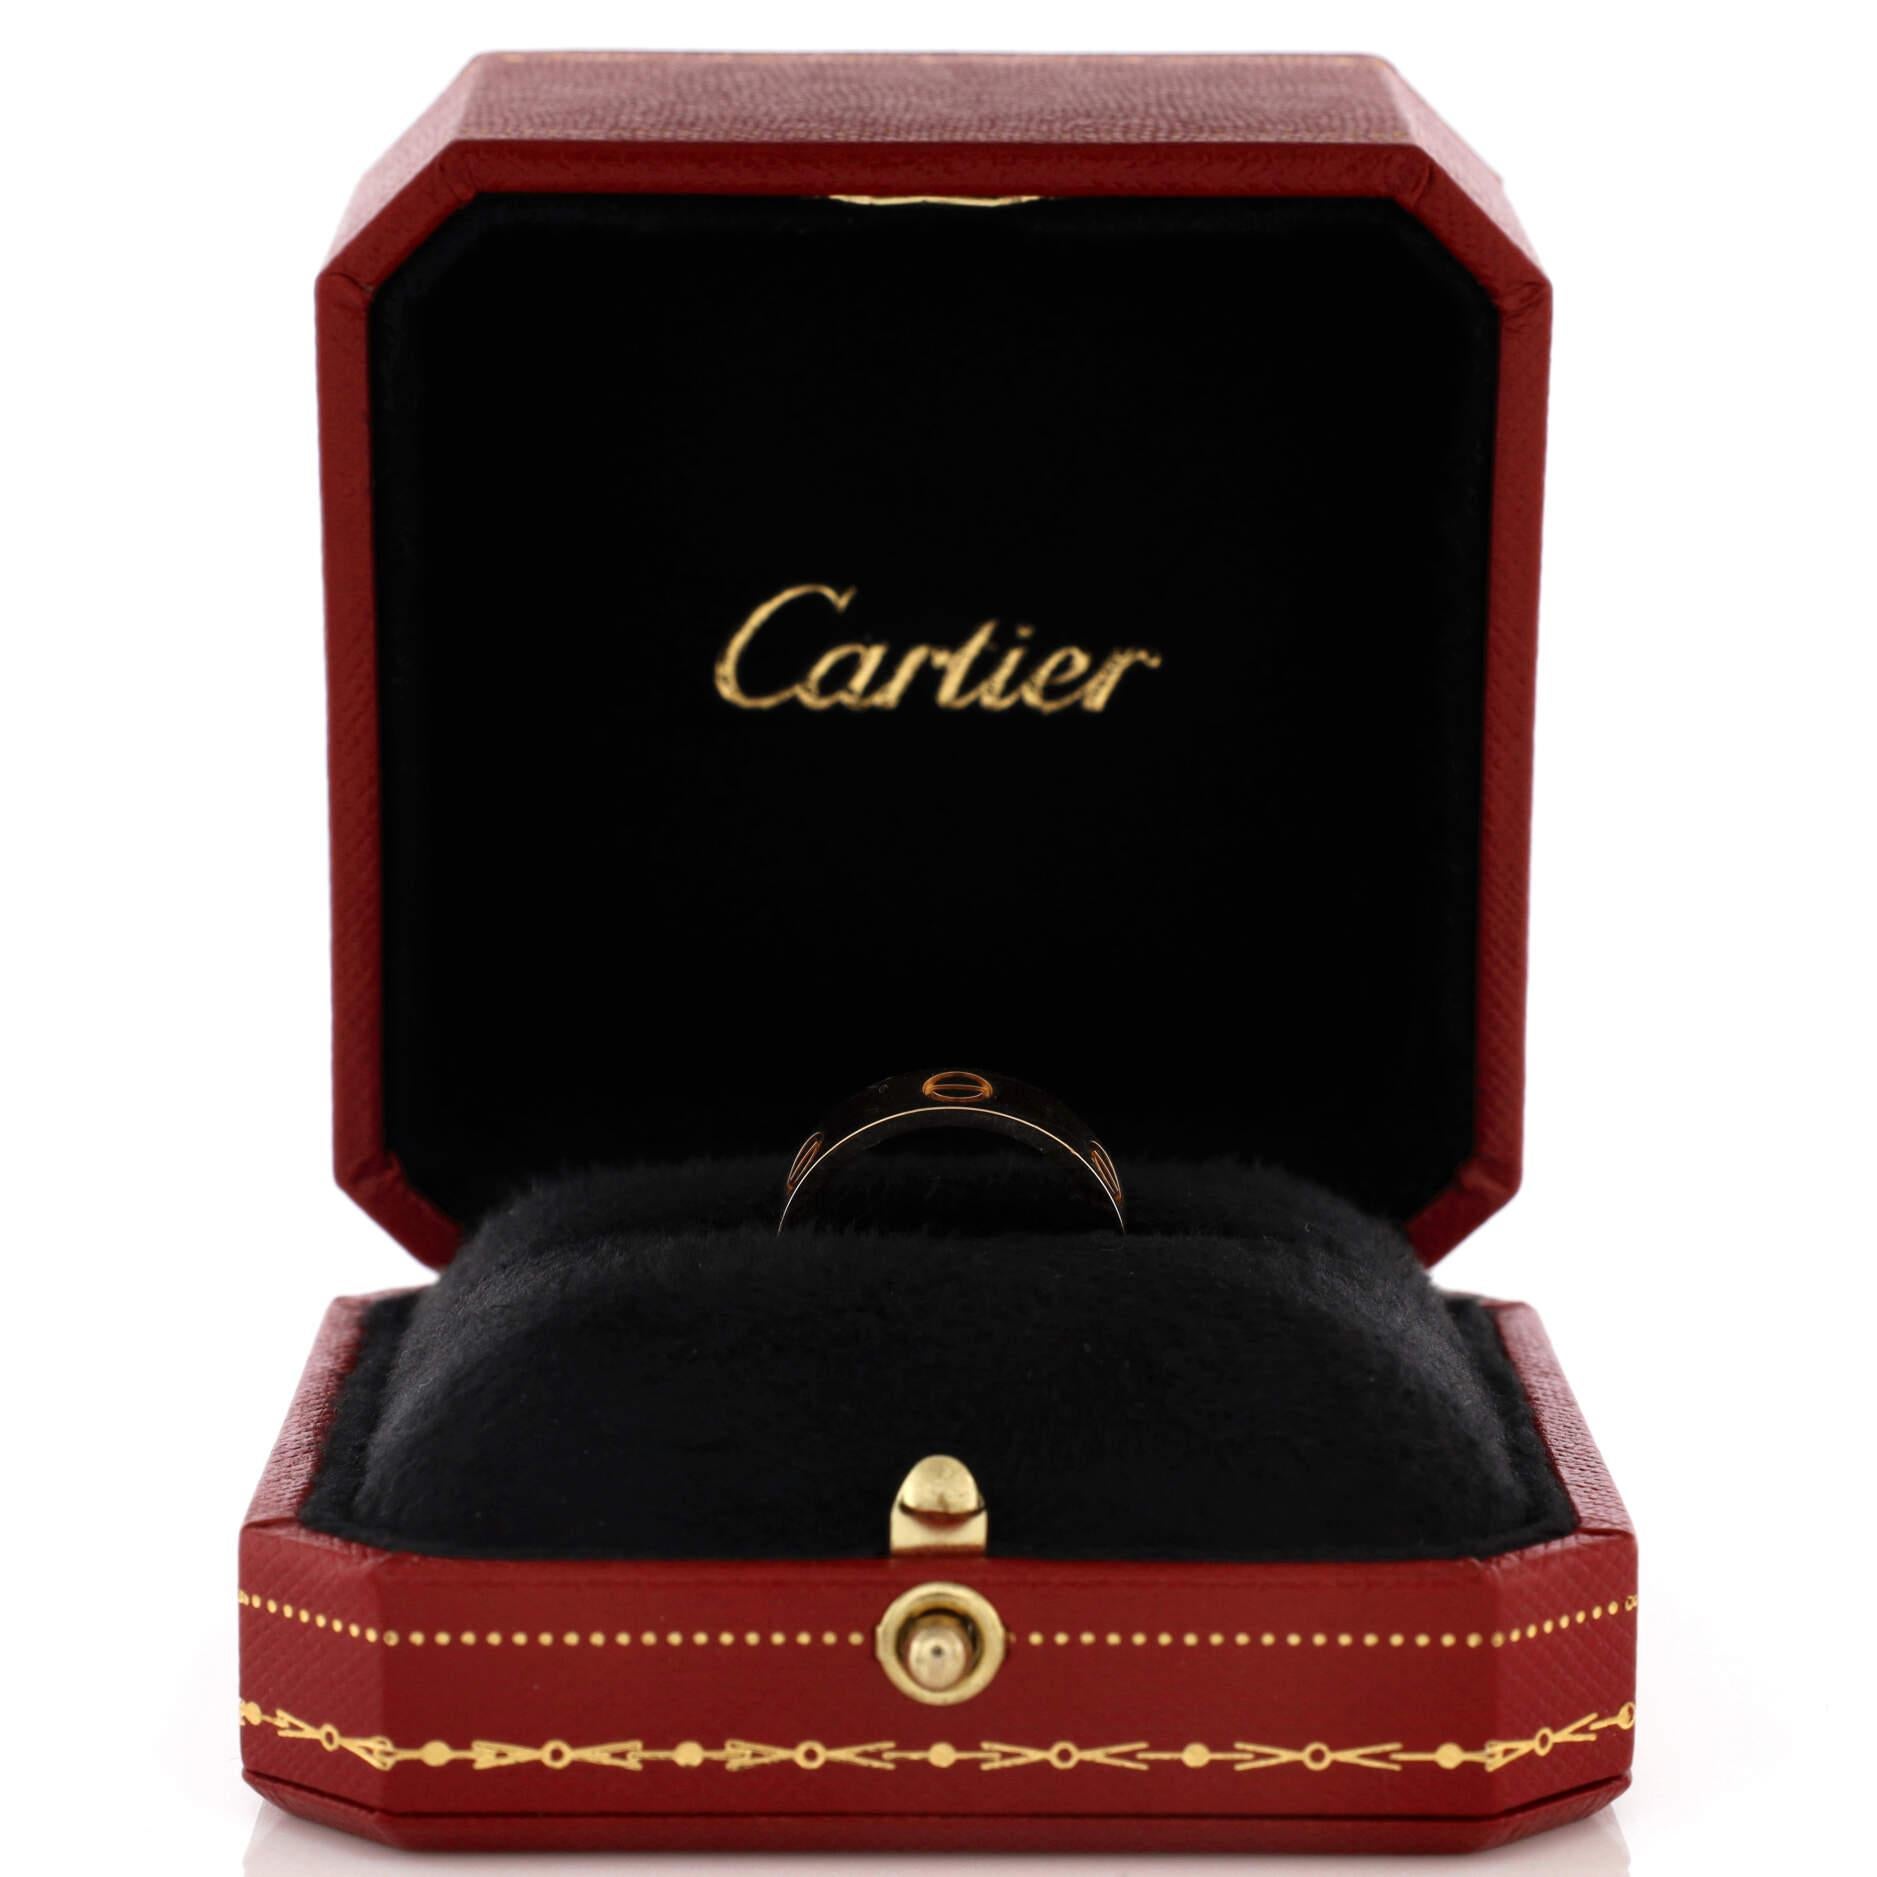 Condition: Very good. Moderate wear throughout.
Accessories: No Accessories
Measurements: Size: 7.25 - 55, Width: 5.50 mm
Designer: Cartier
Model: Love Band Ring 18K Yellow Gold
Exterior Color: Yellow Gold
Item Number: 212260/1